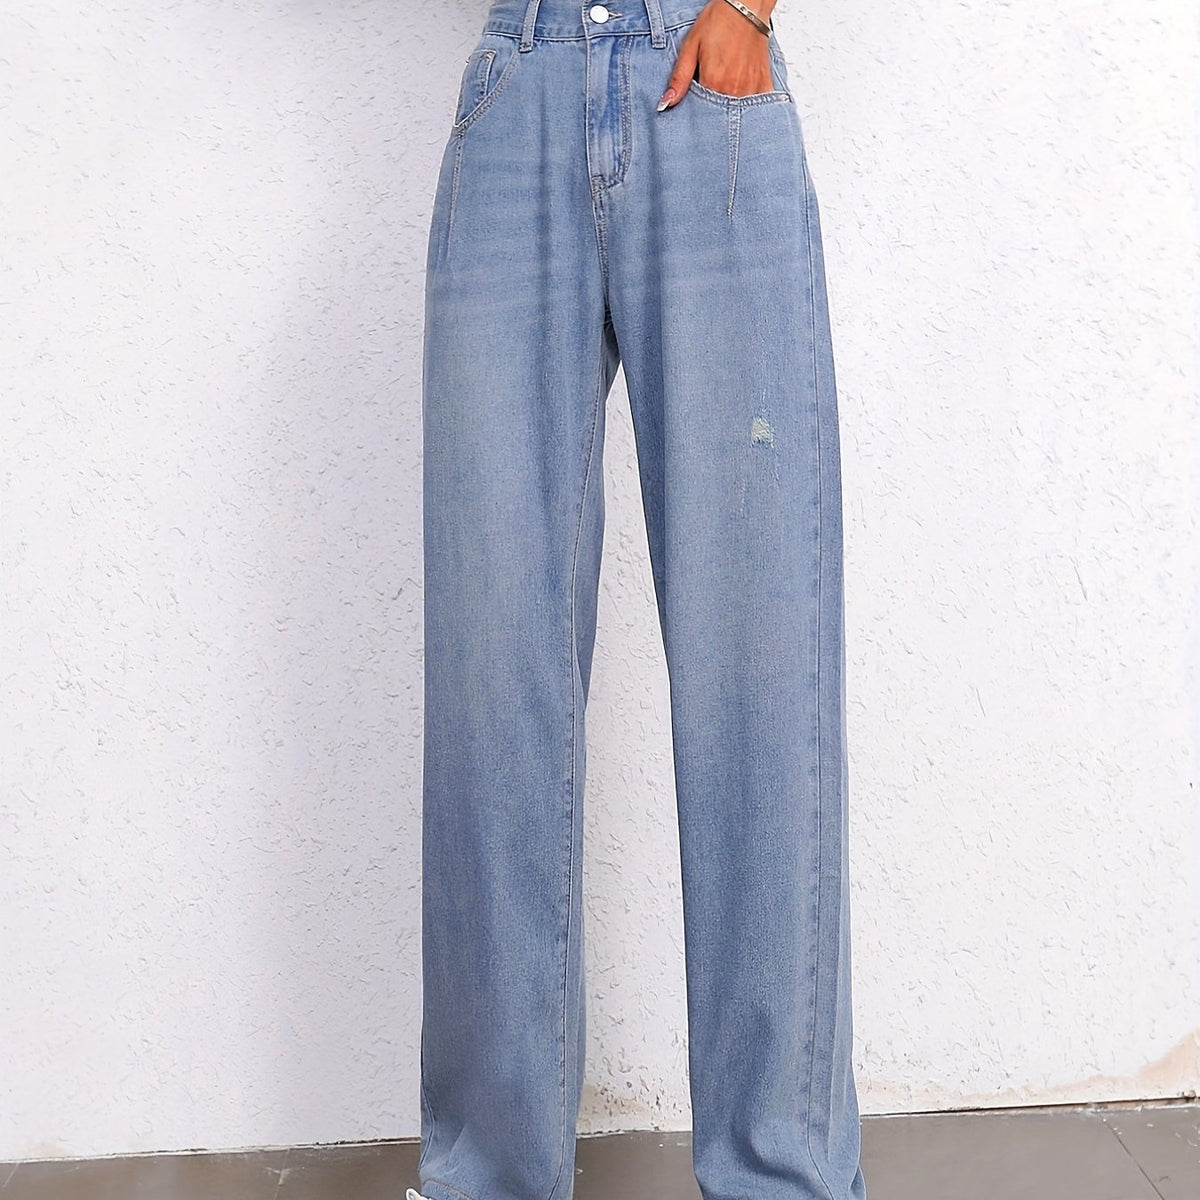 「lovevop」Ripped Water Ripple Embossed Denim Pants, Slash Pocket Causal Style Straight Leg Jeans, Essential Pants For Every Day, Women's Denim Jeans & Clothing